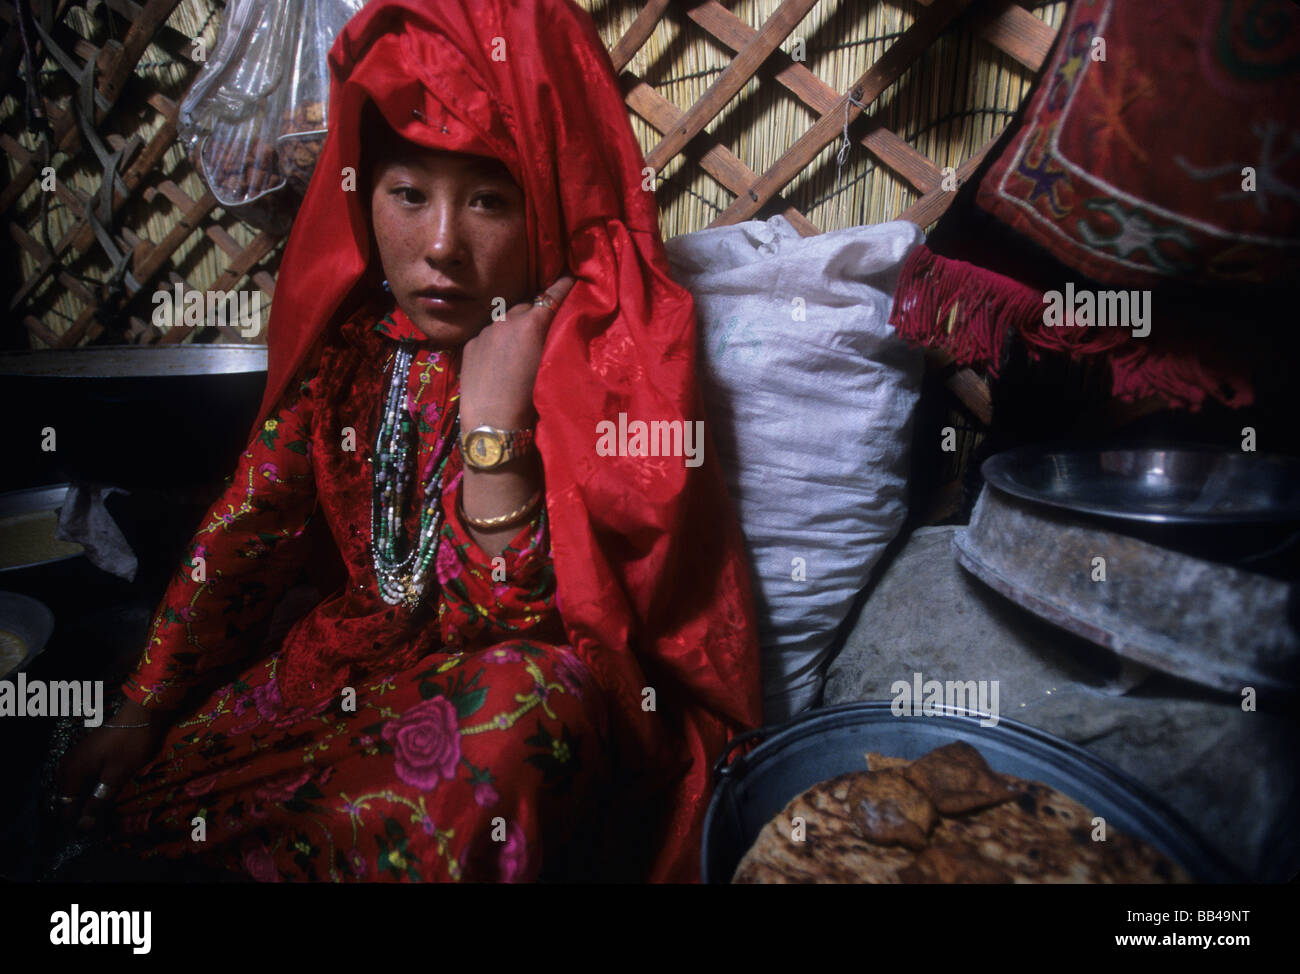 A young Kyrgyz woman in traditional dress waits for her marriage ceremony inside a yurt in the Little Pamir, Wakhan Corridor. Stock Photo